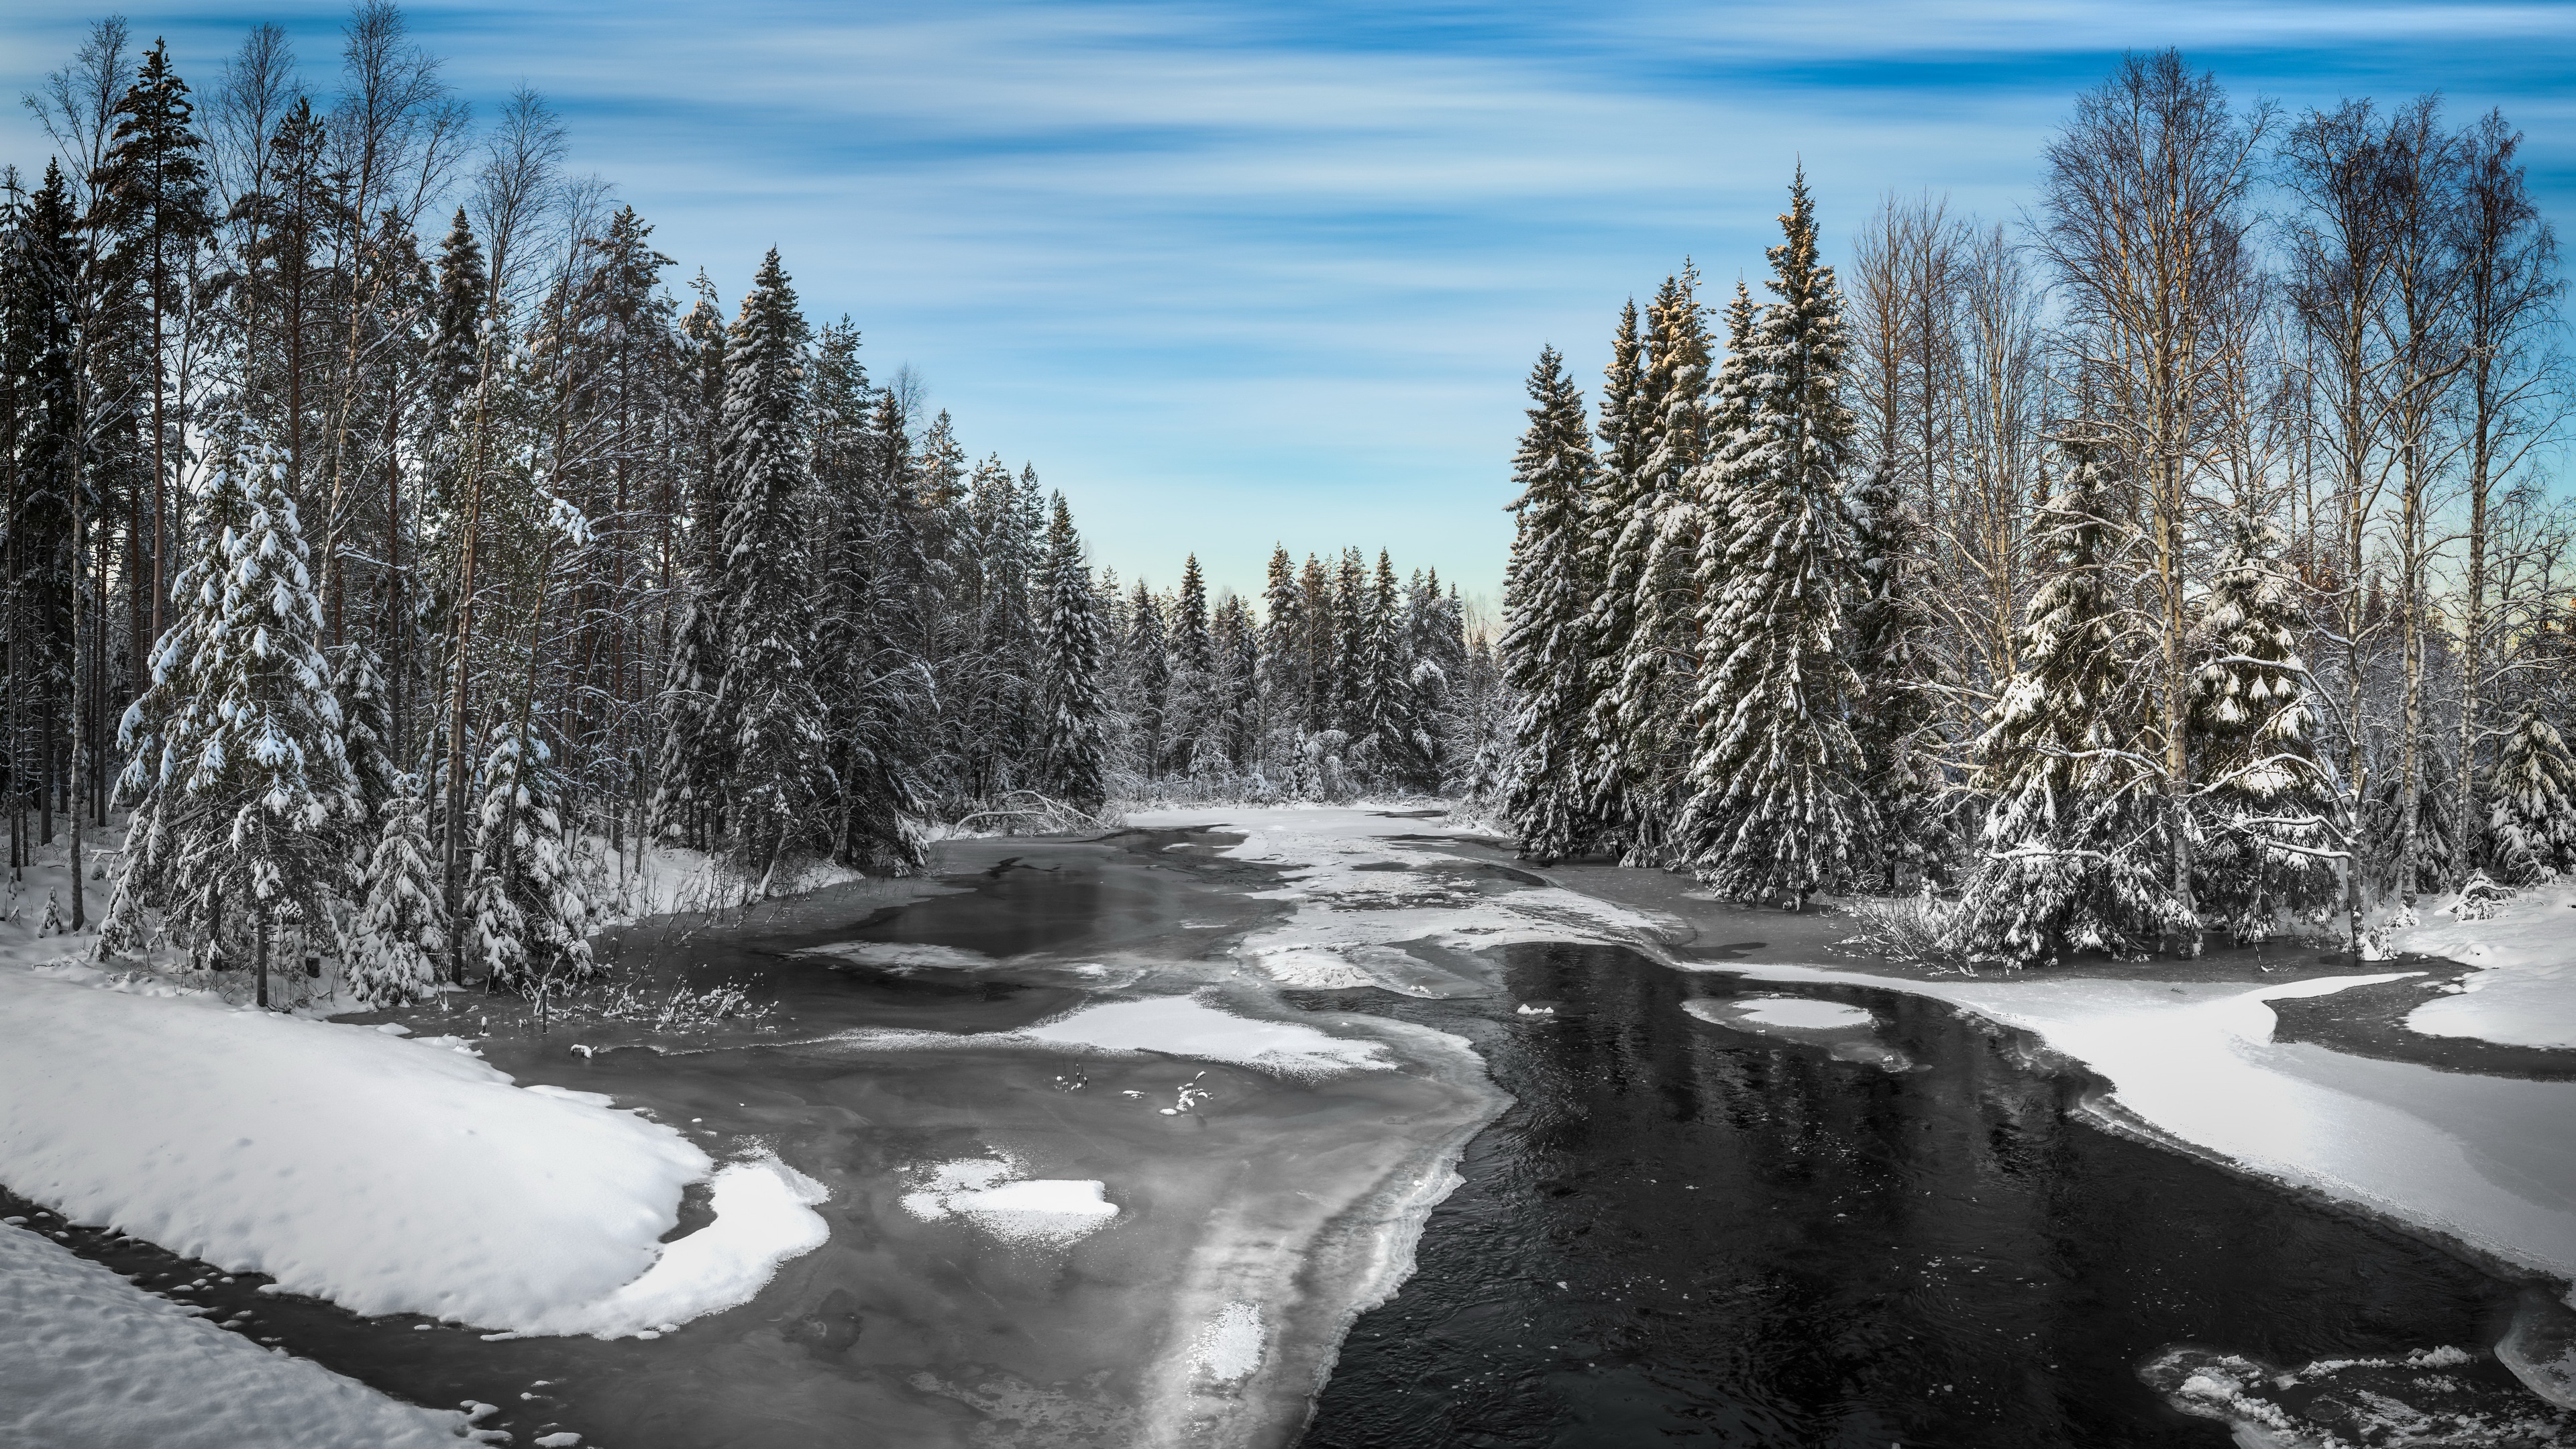 General 3840x2160 river cold winter ice snow nature outdoors